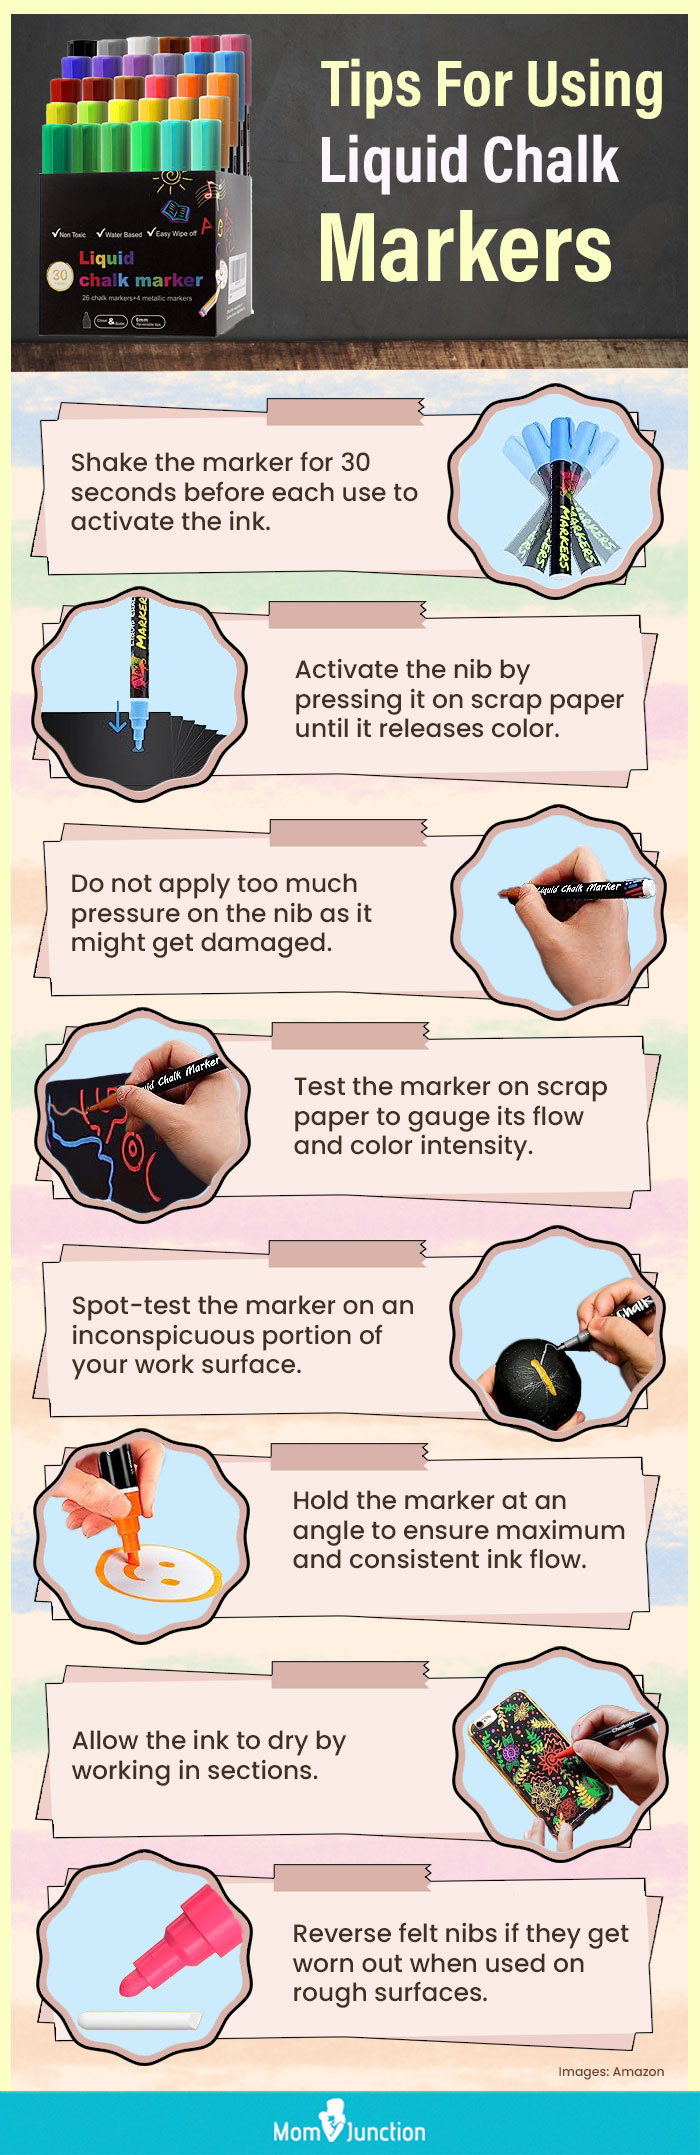 5 Ways to Use Chalk Markers featuring Chalkola Markers 